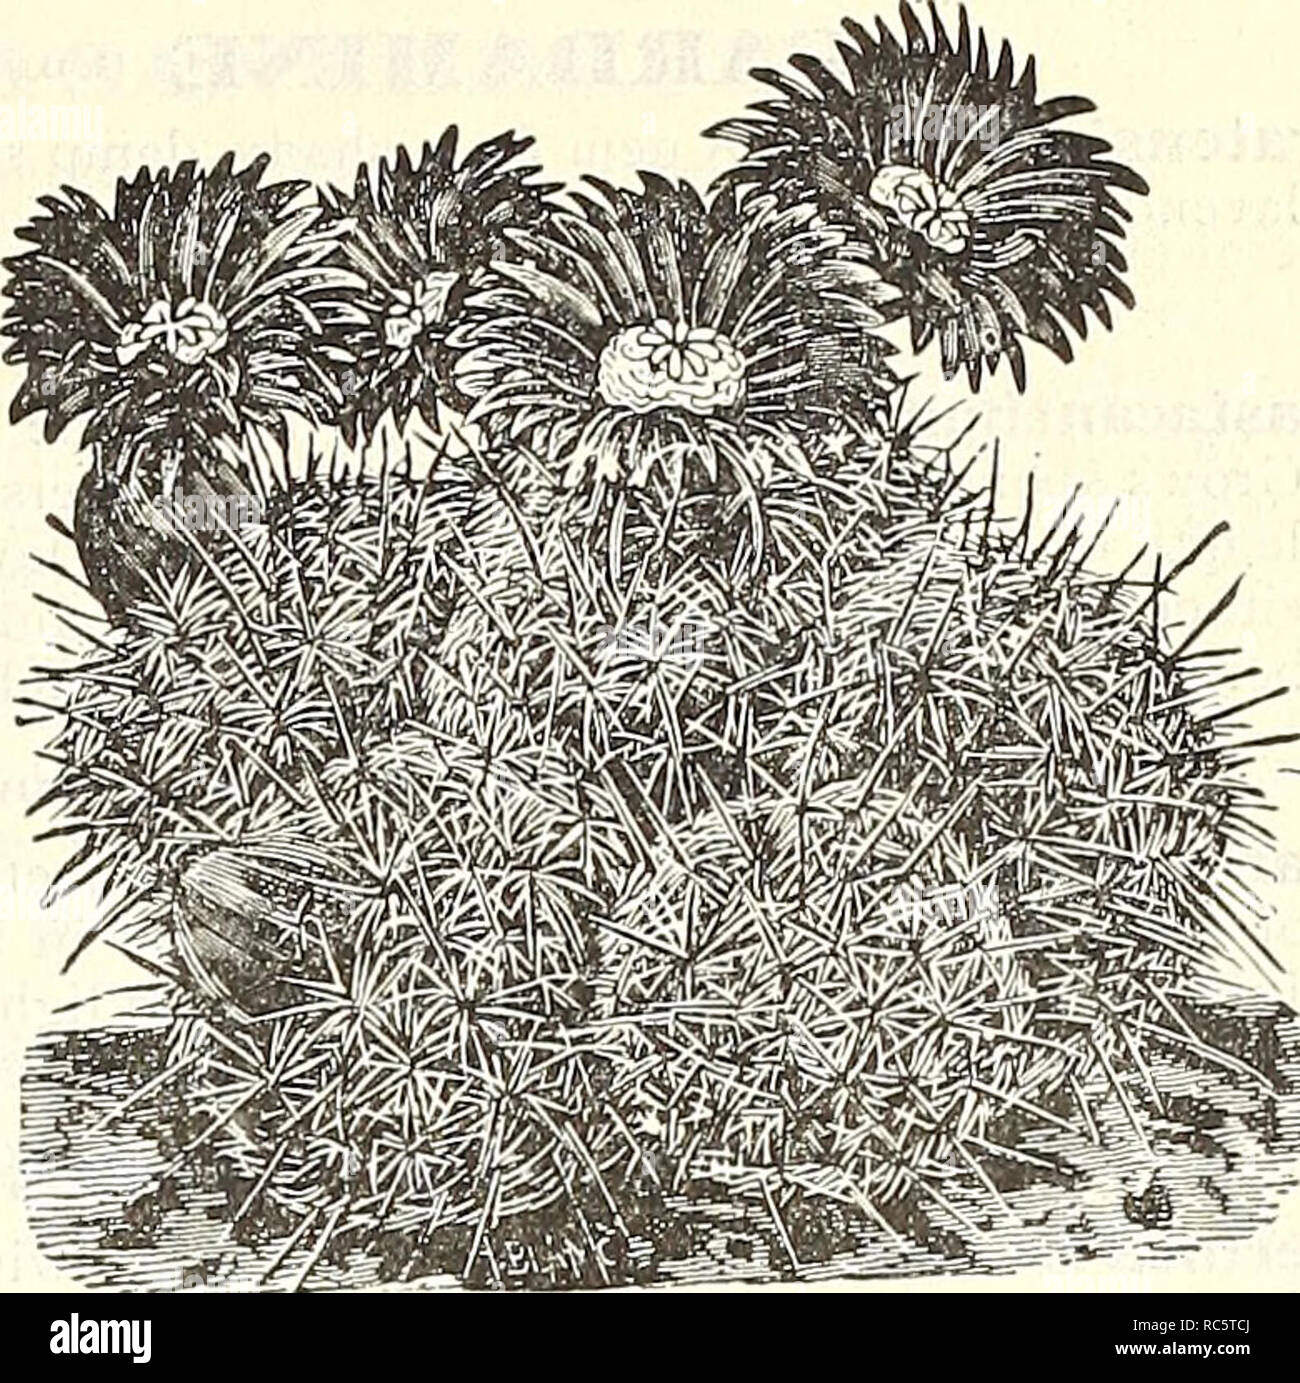 . Dreer's garden calendar : 1903. Seeds Catalogs; Nursery stock Catalogs; Gardening Equipment and supplies Catalogs; Flowers Seeds Catalogs; Vegetables Seeds Catalogs; Fruit Seeds Catalogs. Echinocactus Simpsoni. CALLIRHOE (PoPPy Maiiow). Involucrata. An elegant trailing plant, with finely divided foliage and large saucer-shaped flowers, of deep rosy crimson, with white centres, which are produced during the entire summer months ; trailing over rocks it gives a graceful and gorgeous effect. 15 cts. each ; $1.50 per doz. CALTHA (Marsh Marigold). Palustris. Large bright yellow flowers, produced  Stock Photo